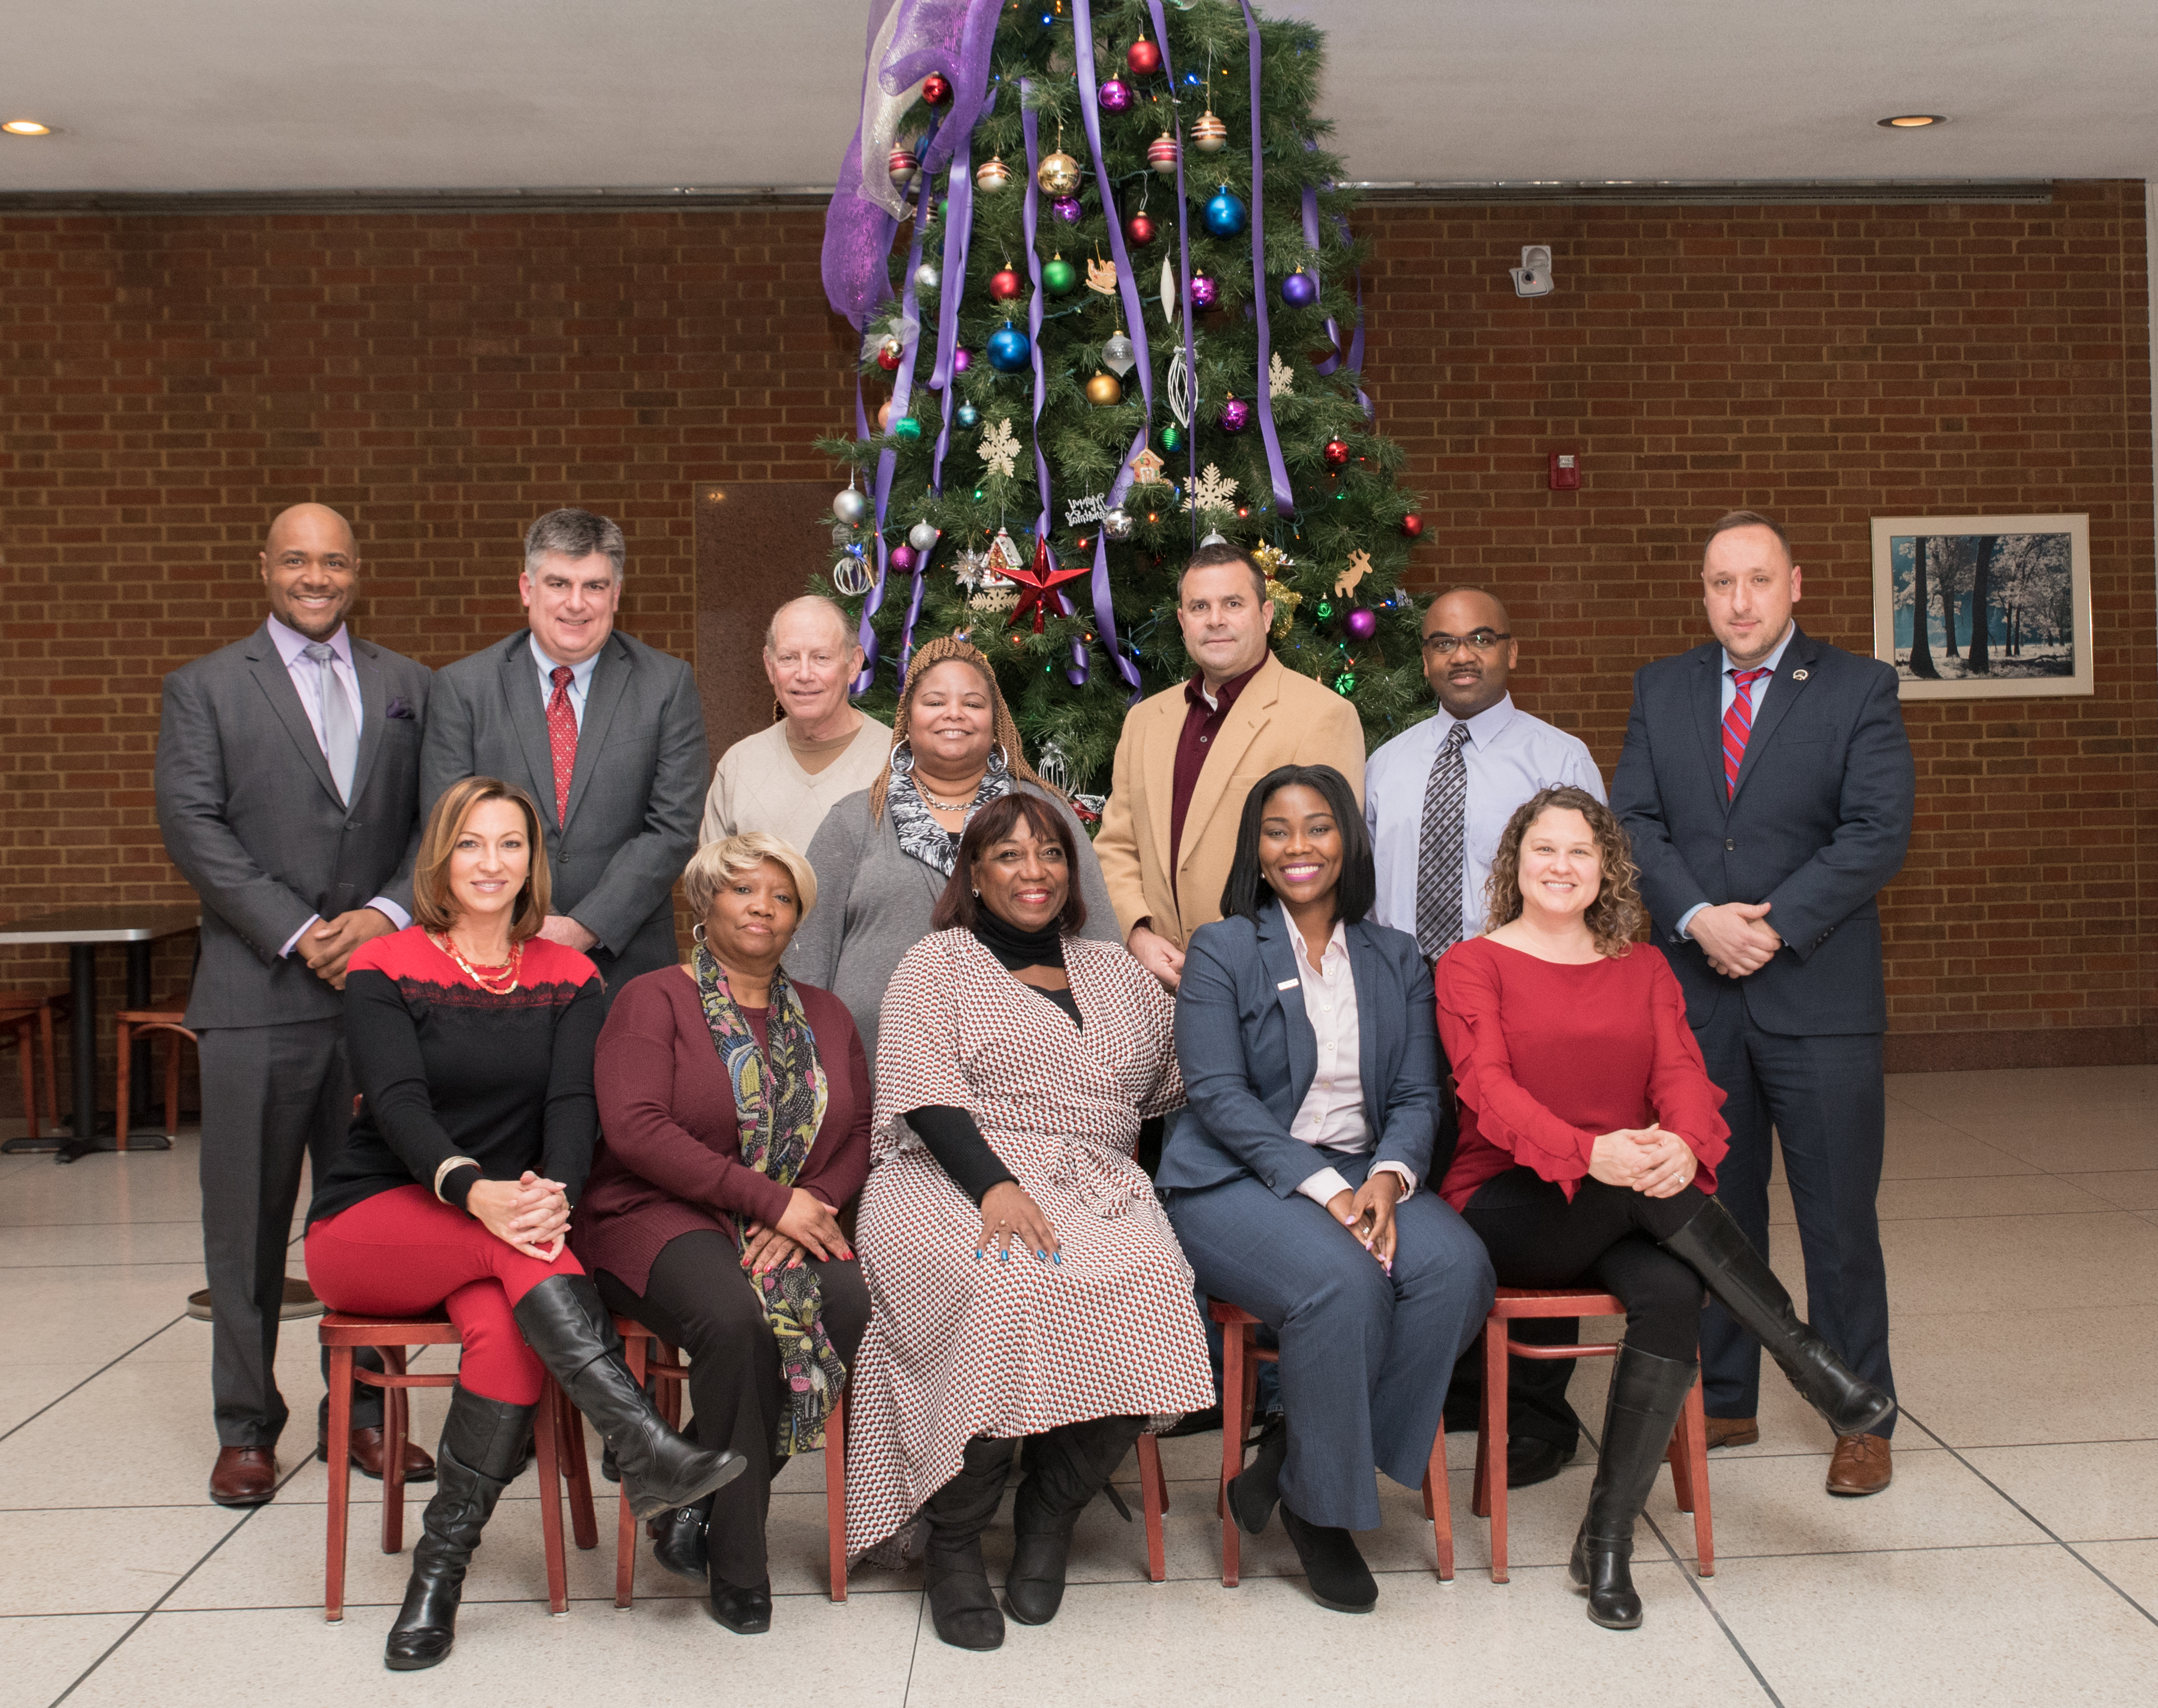 Happy Holidays from the Civilian Oversight Board Members and Staff